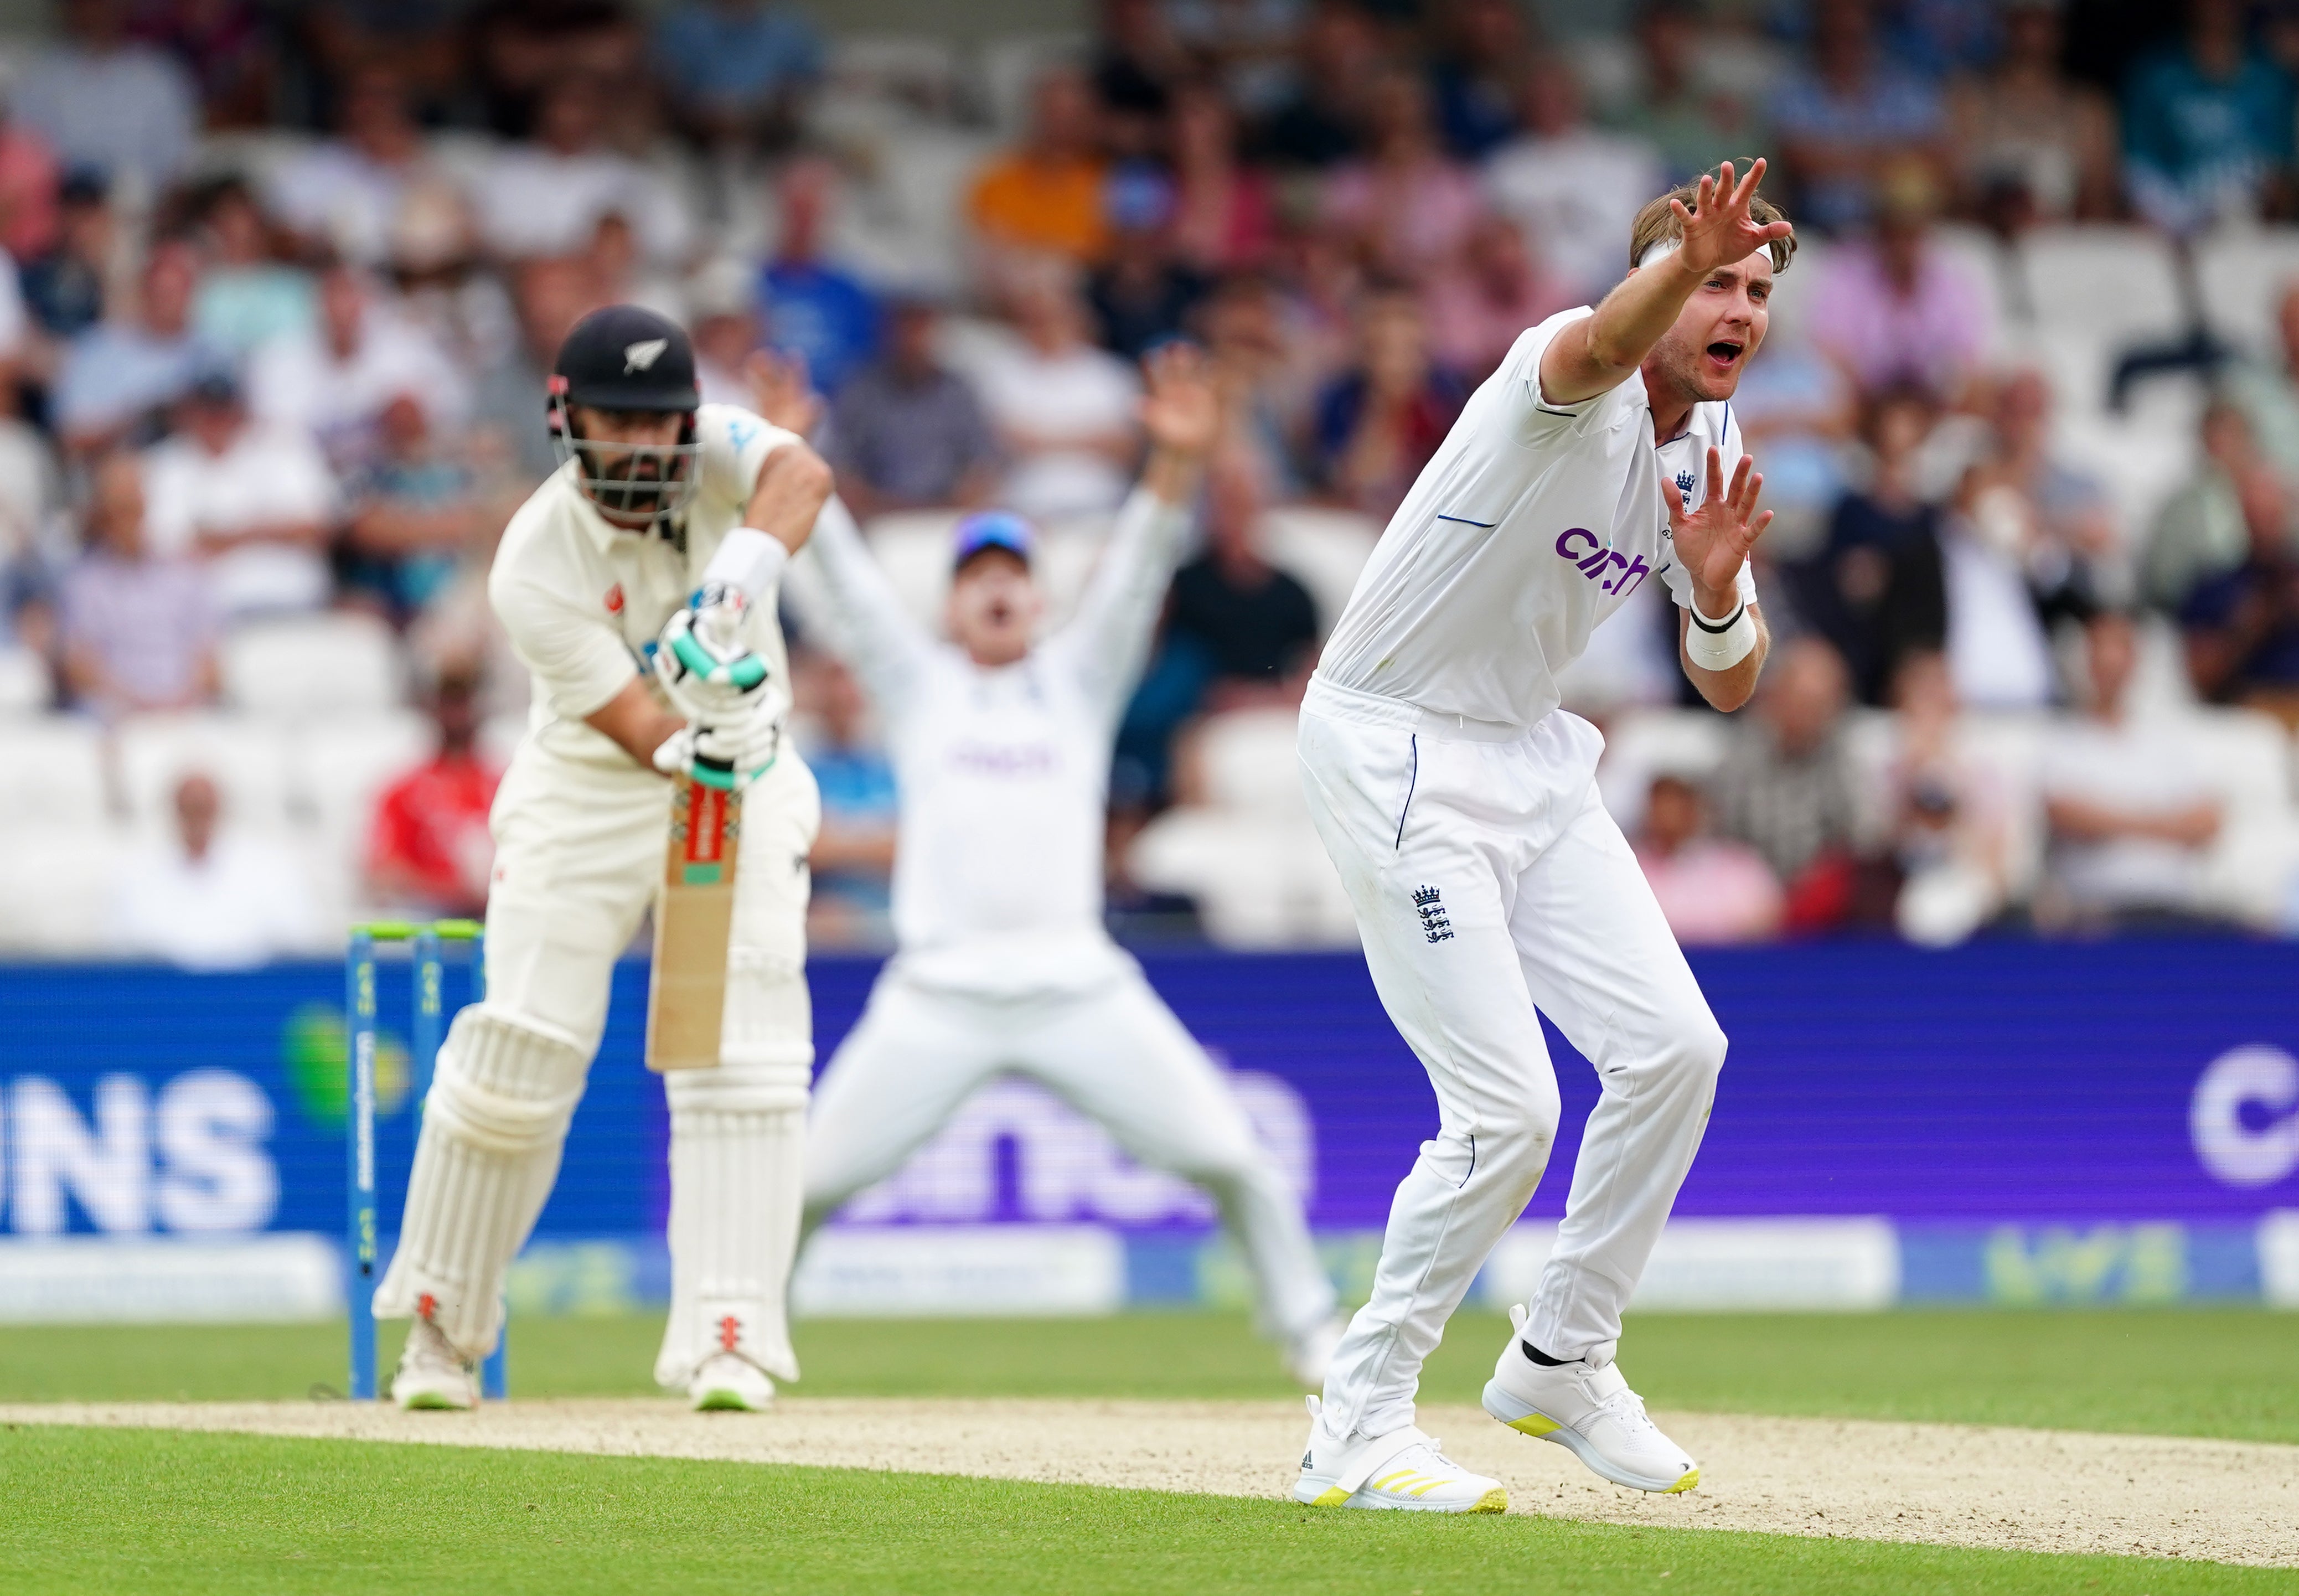 Broad claimed two wickets during the morning session